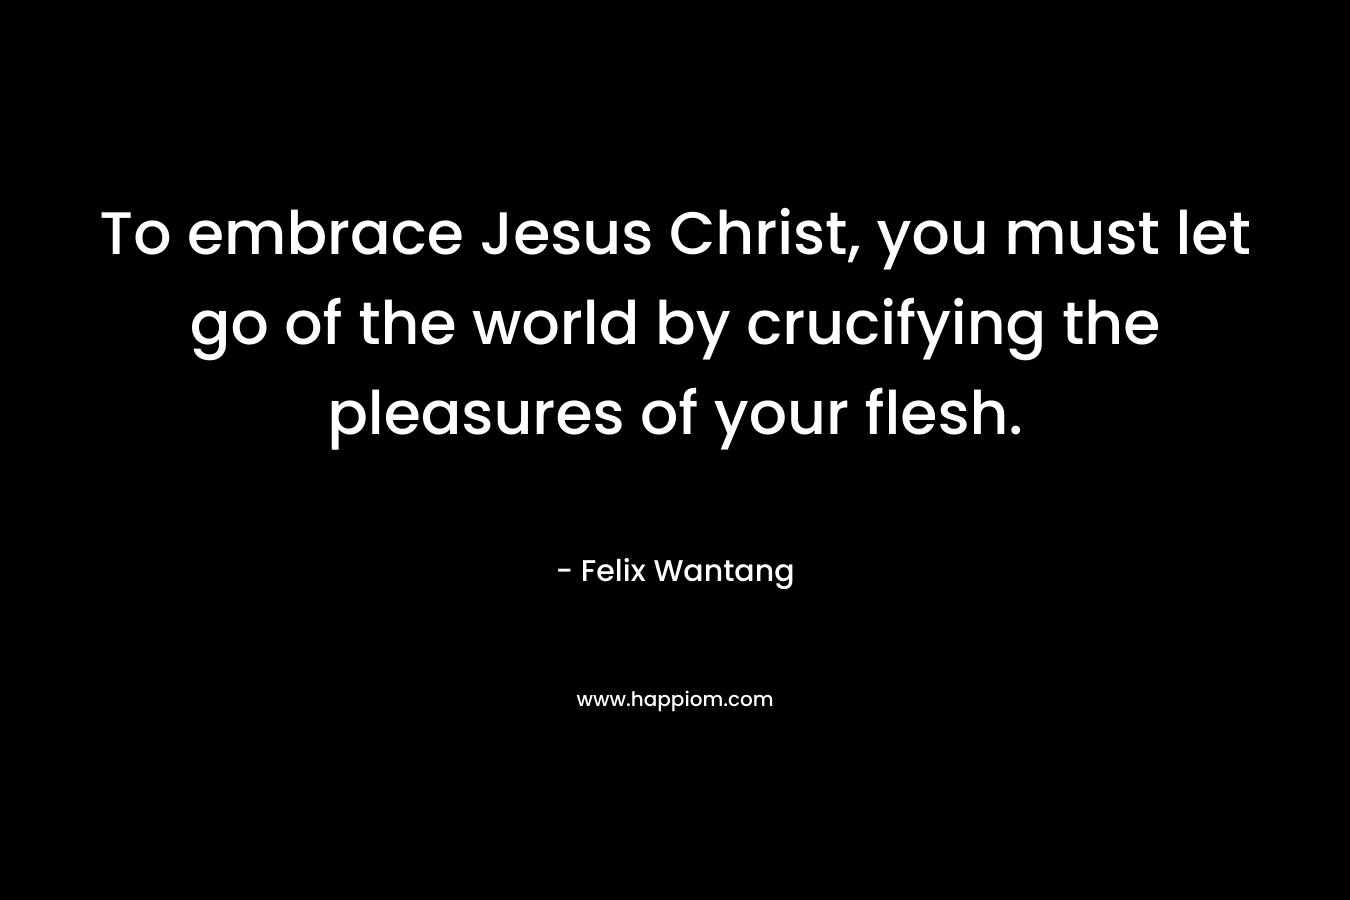 To embrace Jesus Christ, you must let go of the world by crucifying the pleasures of your flesh.